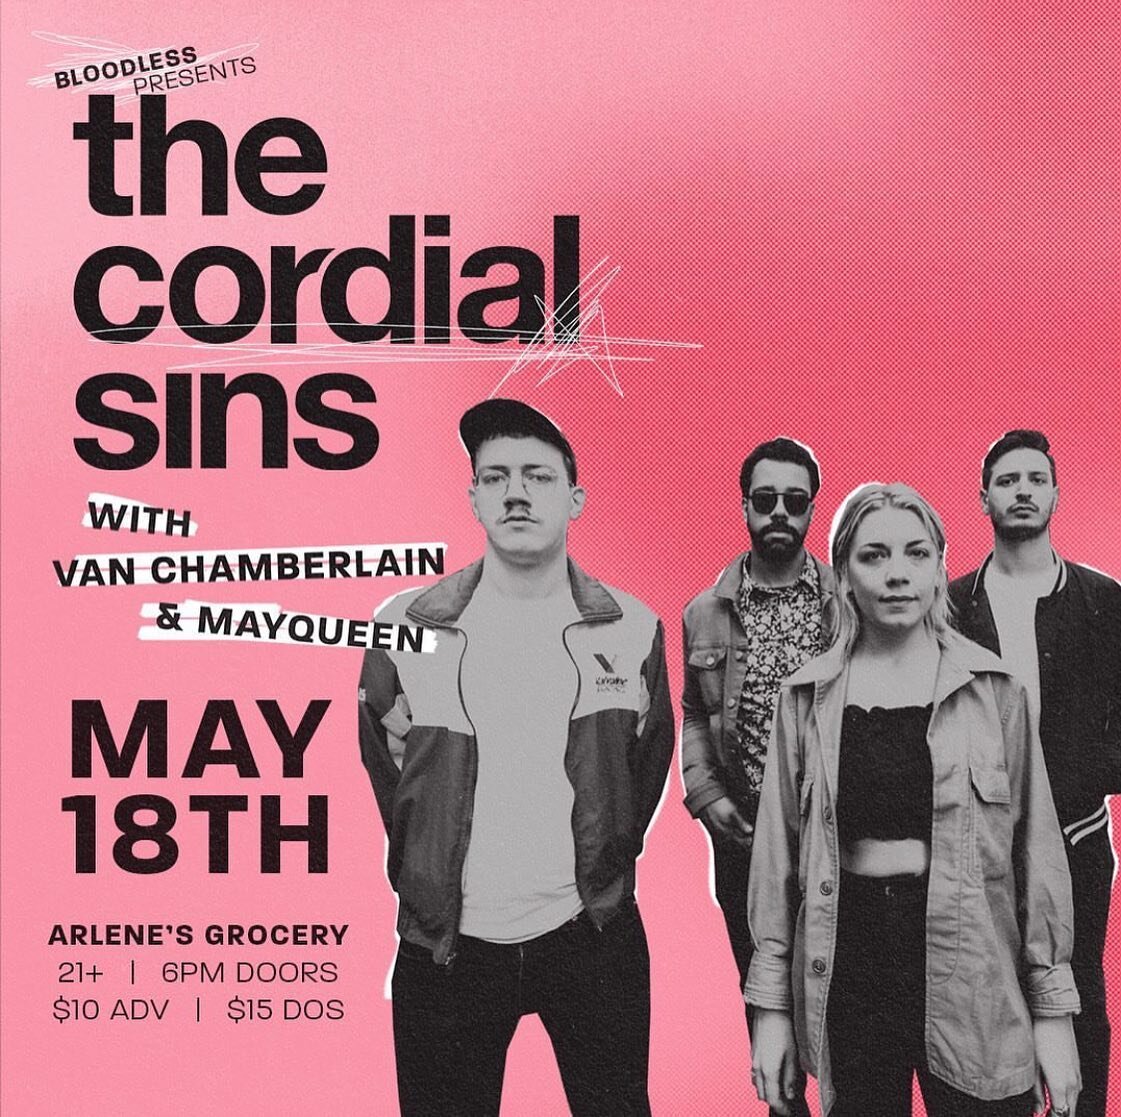 Our next show is on May 18th in NYC at @arlenesgrocery 
.
@bloodless_mgmt presents @thecordialsins us &amp; @mayqueentheband 😎
.
++ congrats to @thecordialsins on their LP release this week, its so awesome
.
🎫 in bio 😎